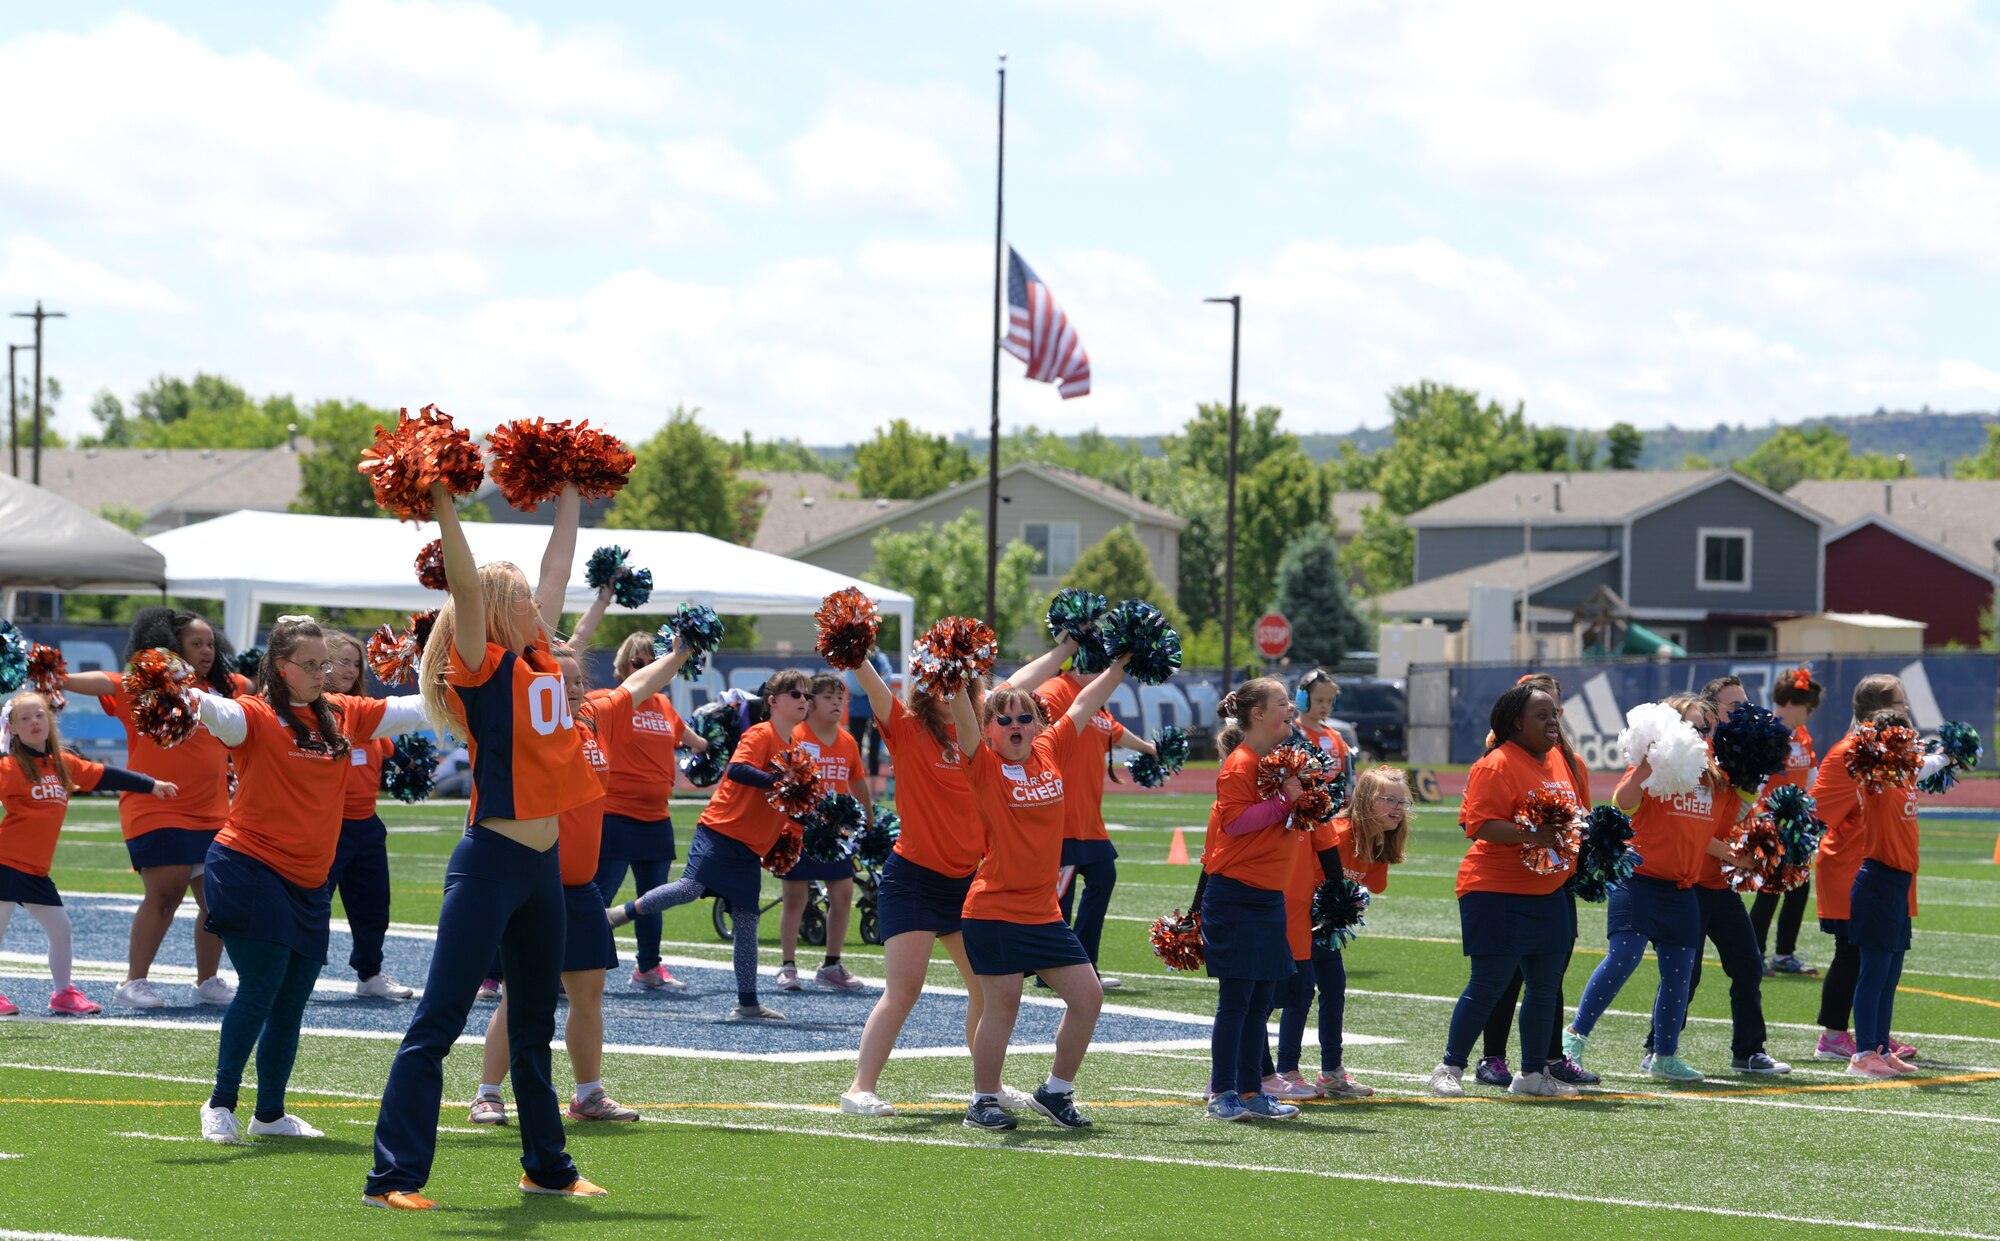 Cheerleaders with the Denver Broncos lead the cheerleaders for the Dare to Play football event during the half time show June 22, 2019, in Highlands Ranch, Colorado.